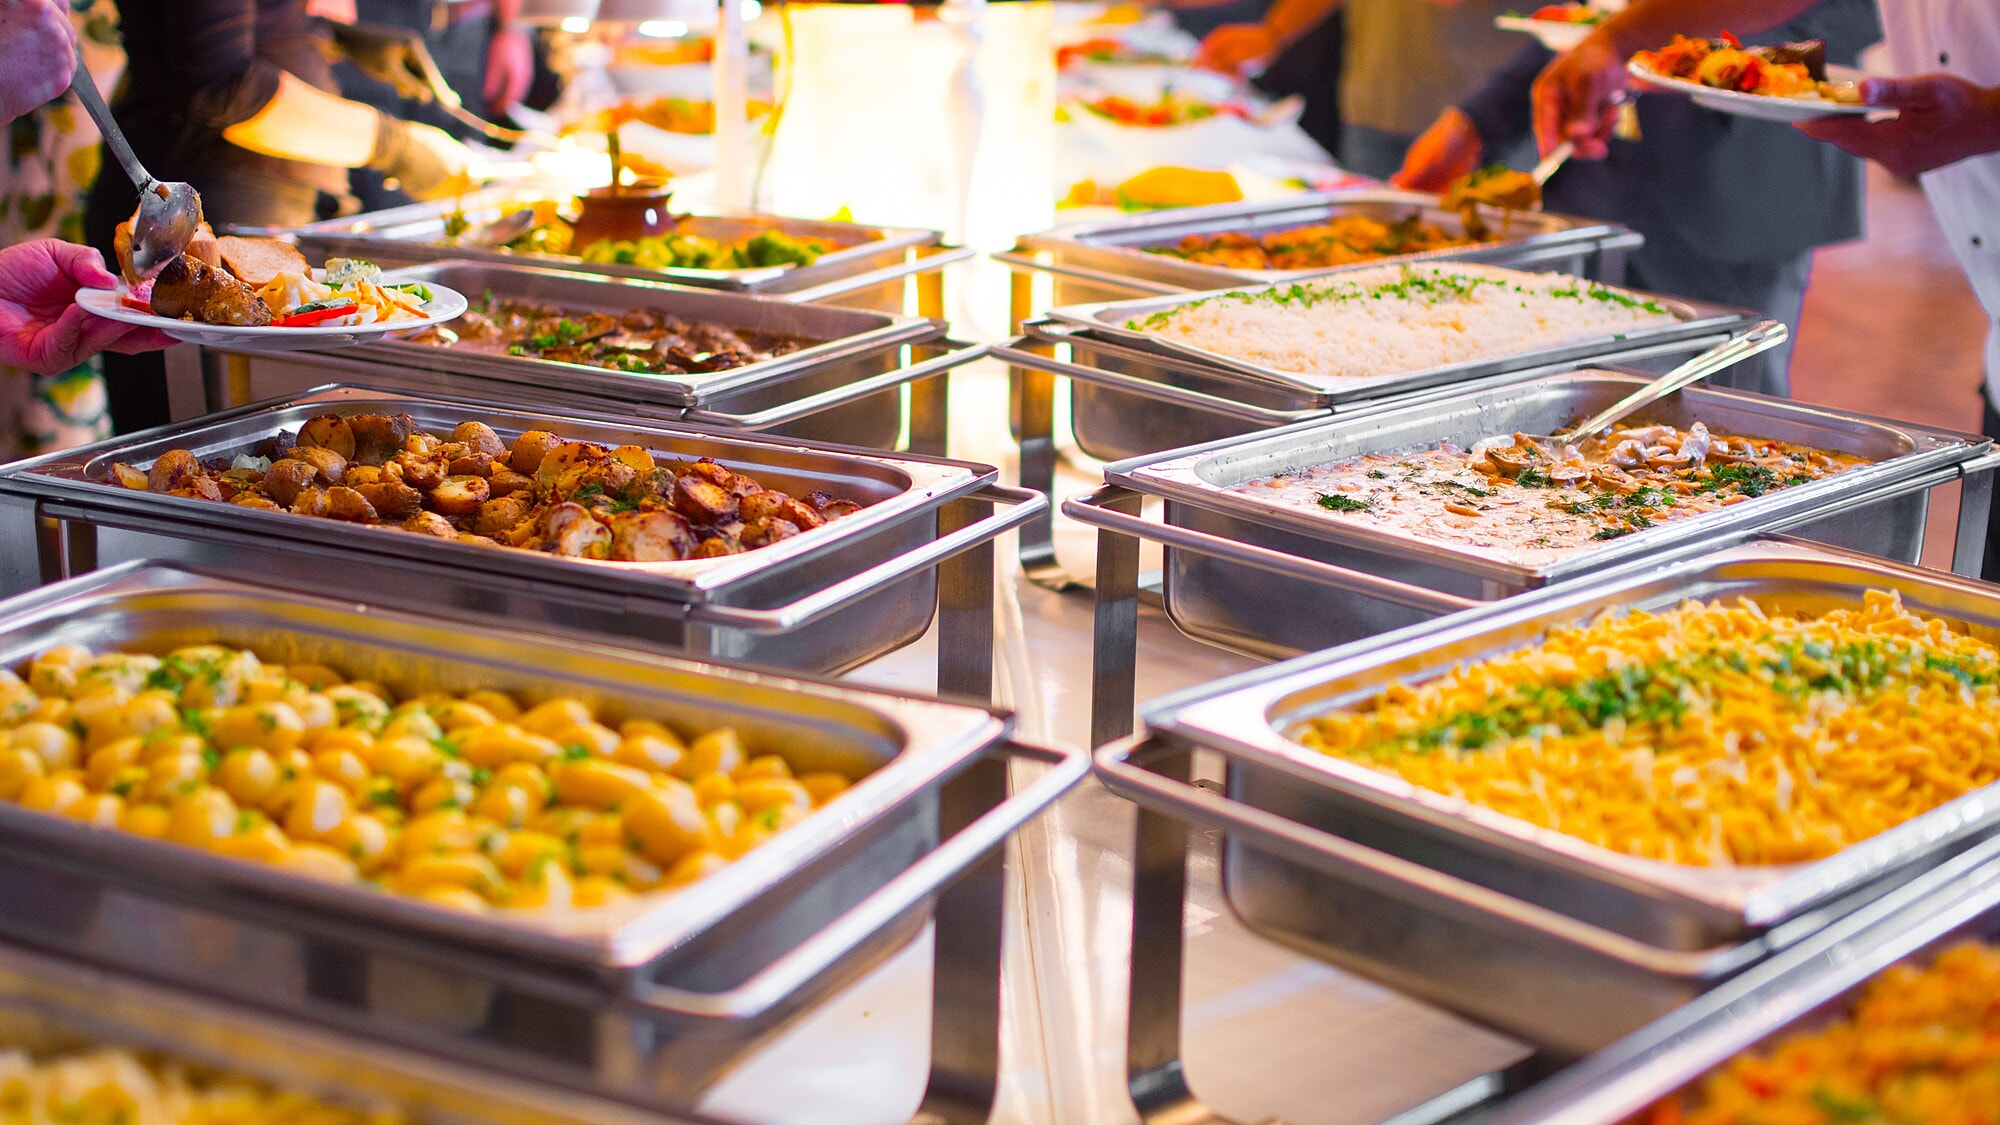 Benefits-of-Food-Catering-Services-in-Singapore-1-1-1.jpg